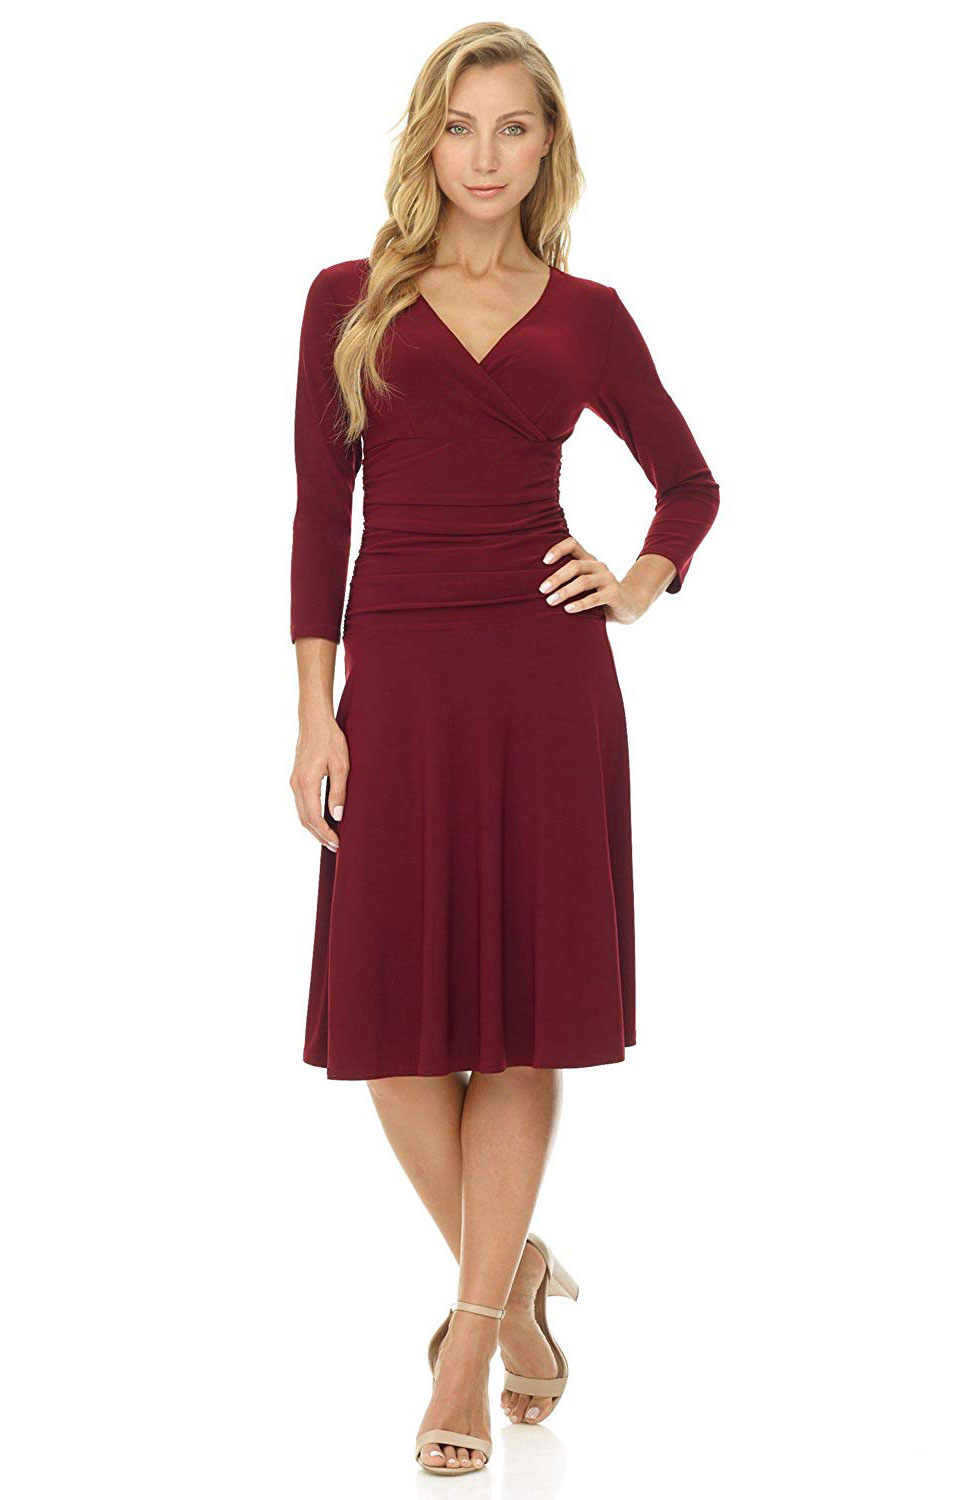 Rekucci 3/4 Sleeve Fit-and-Flare Crossover Dress